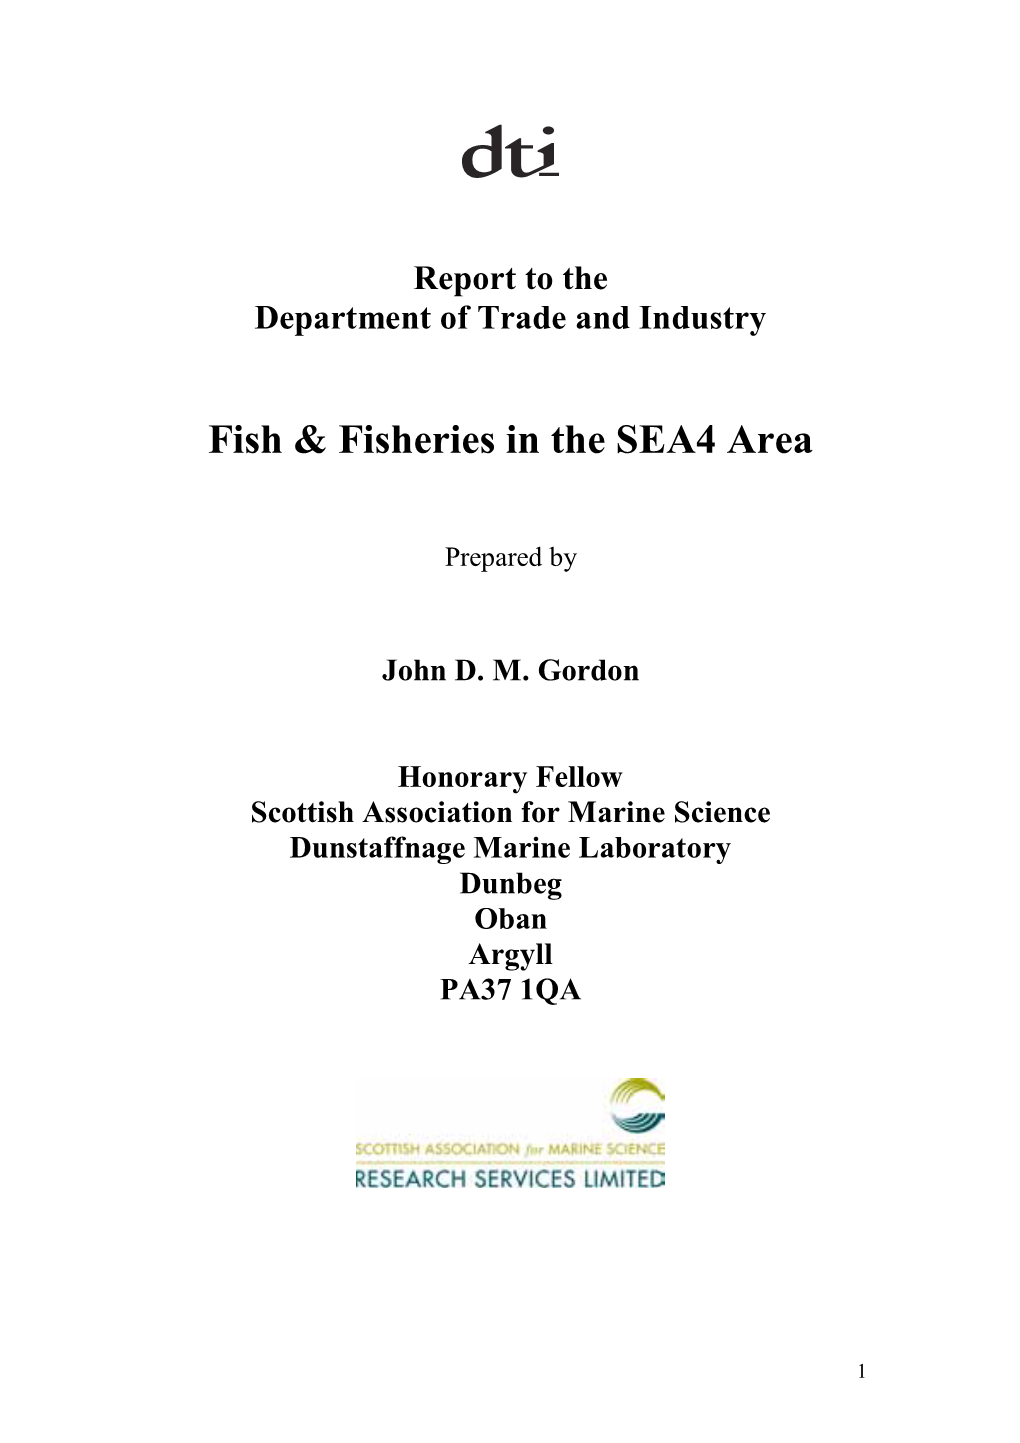 Fish & Fisheries in the SEA4 Area